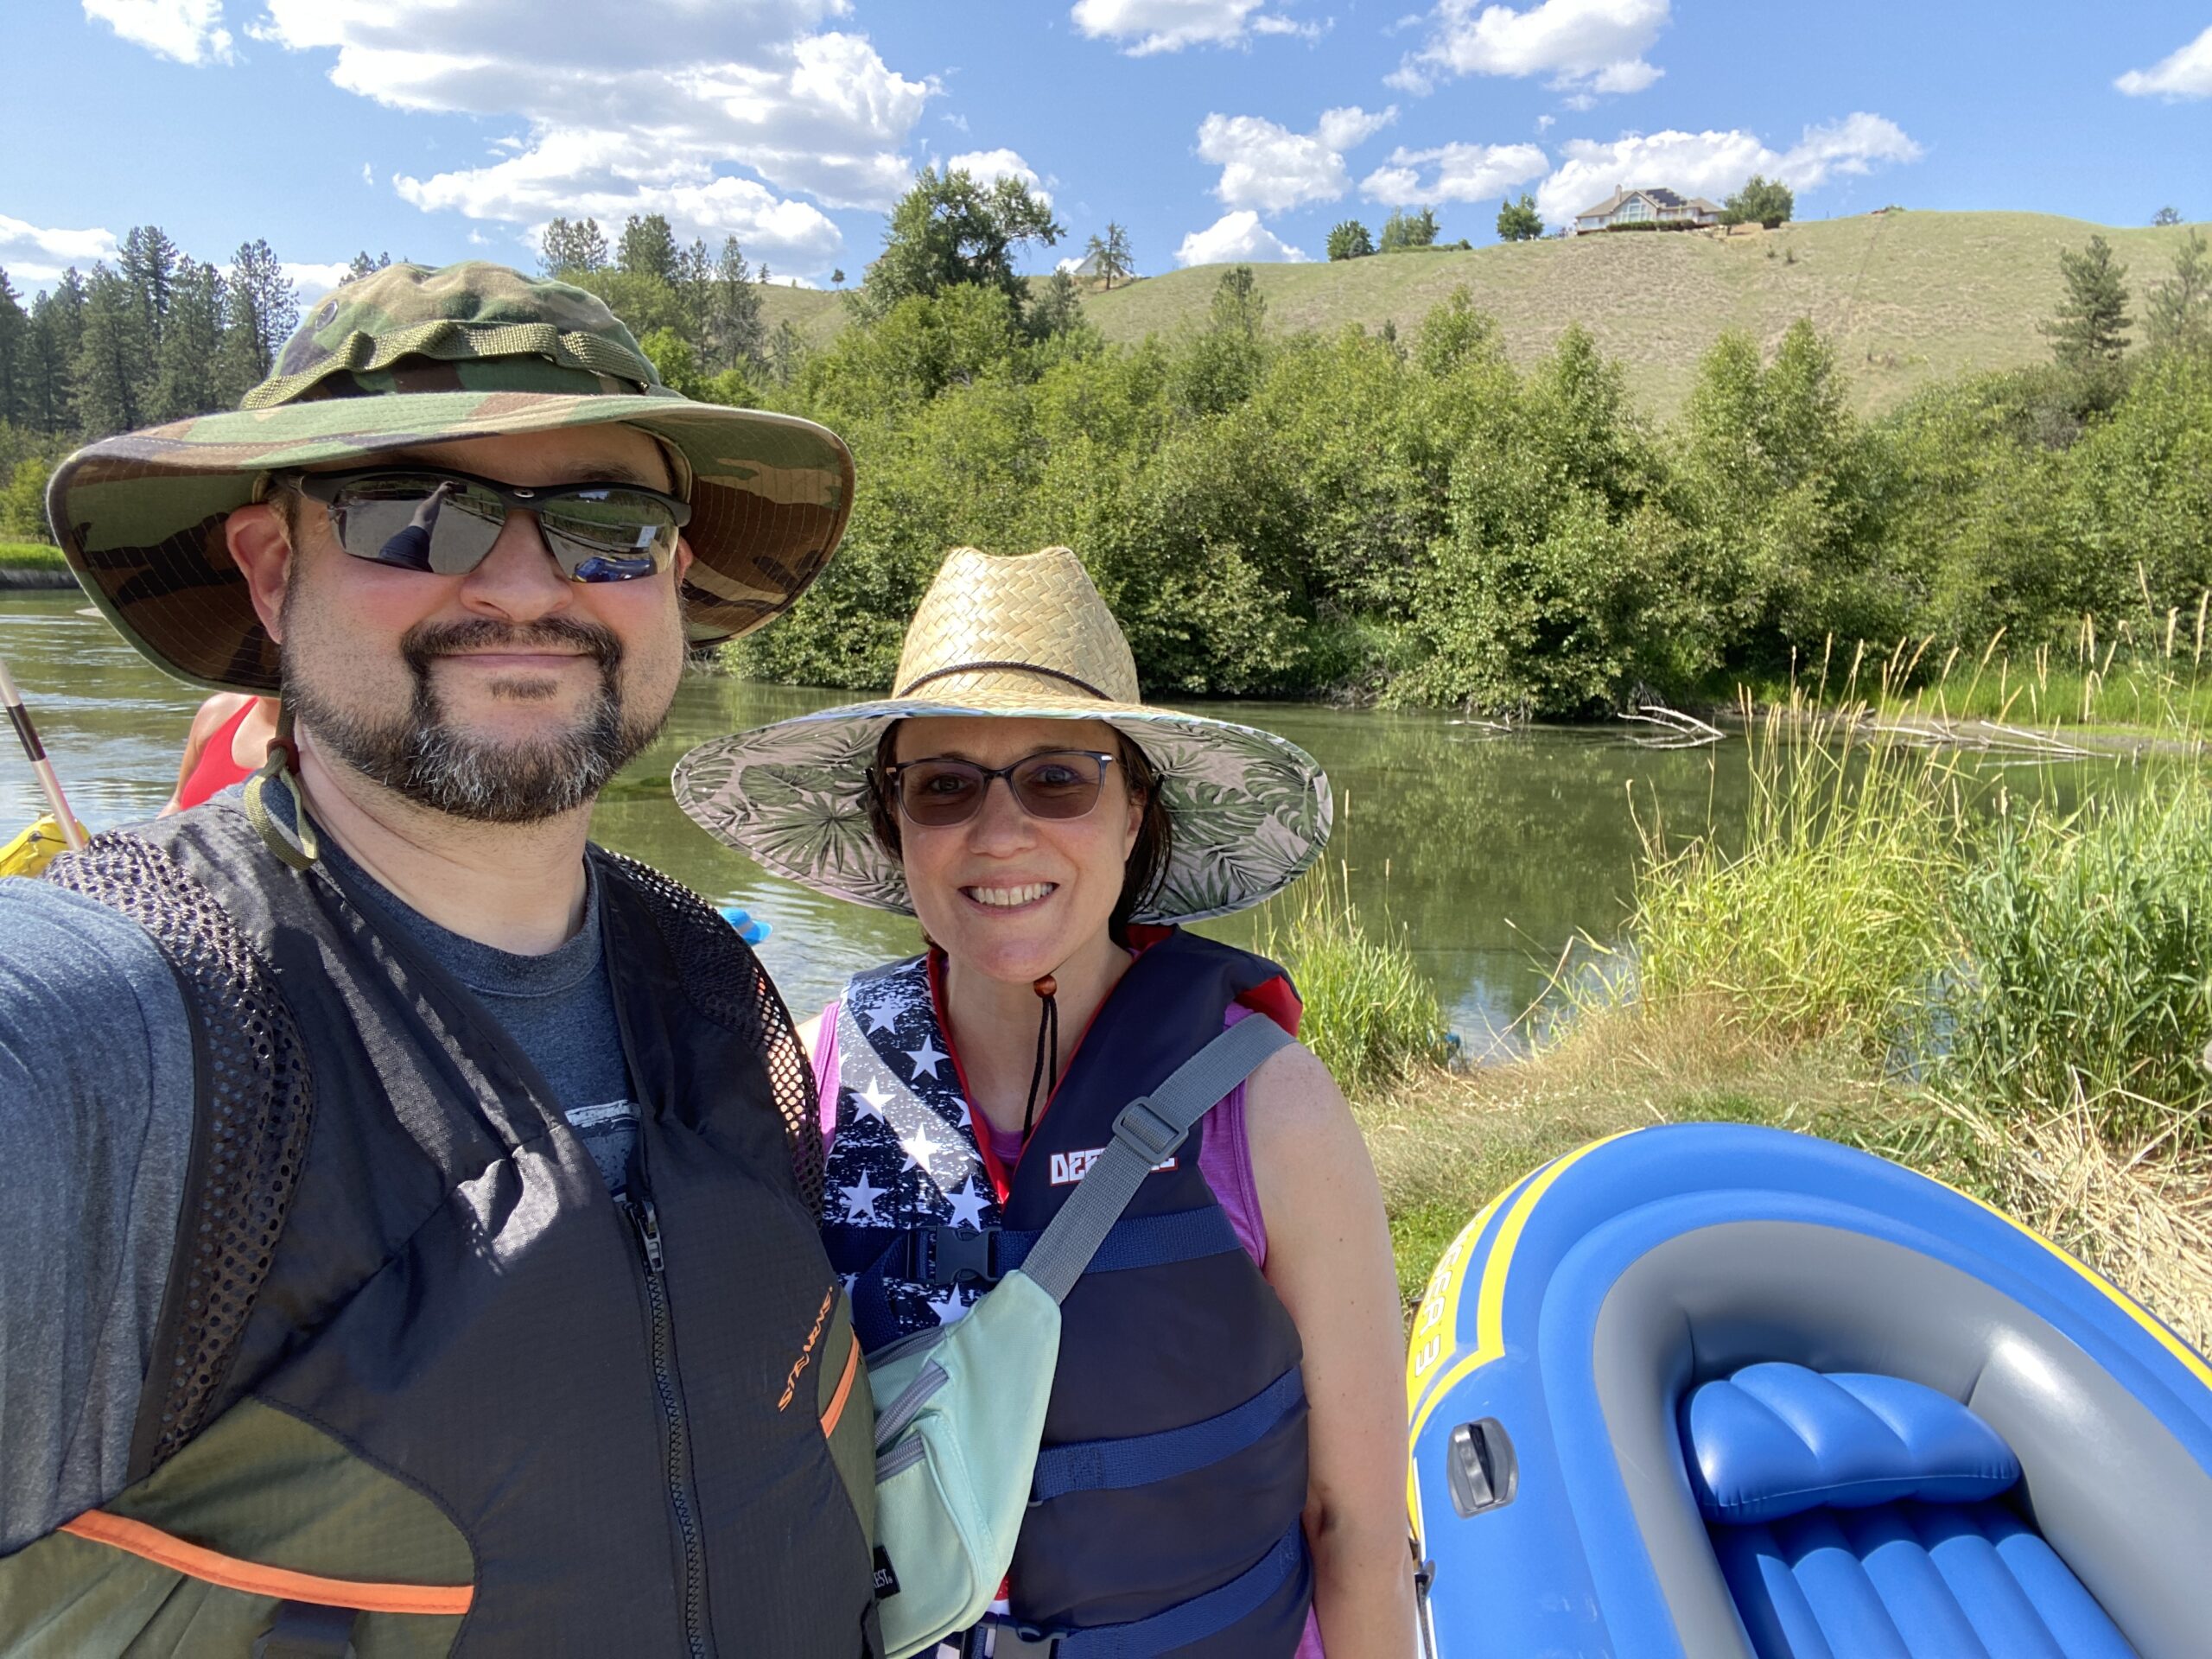 Erich Ebel and his wife smile at the camera with the Little Spokane River in the background and an inflatable blue raft at their feet.